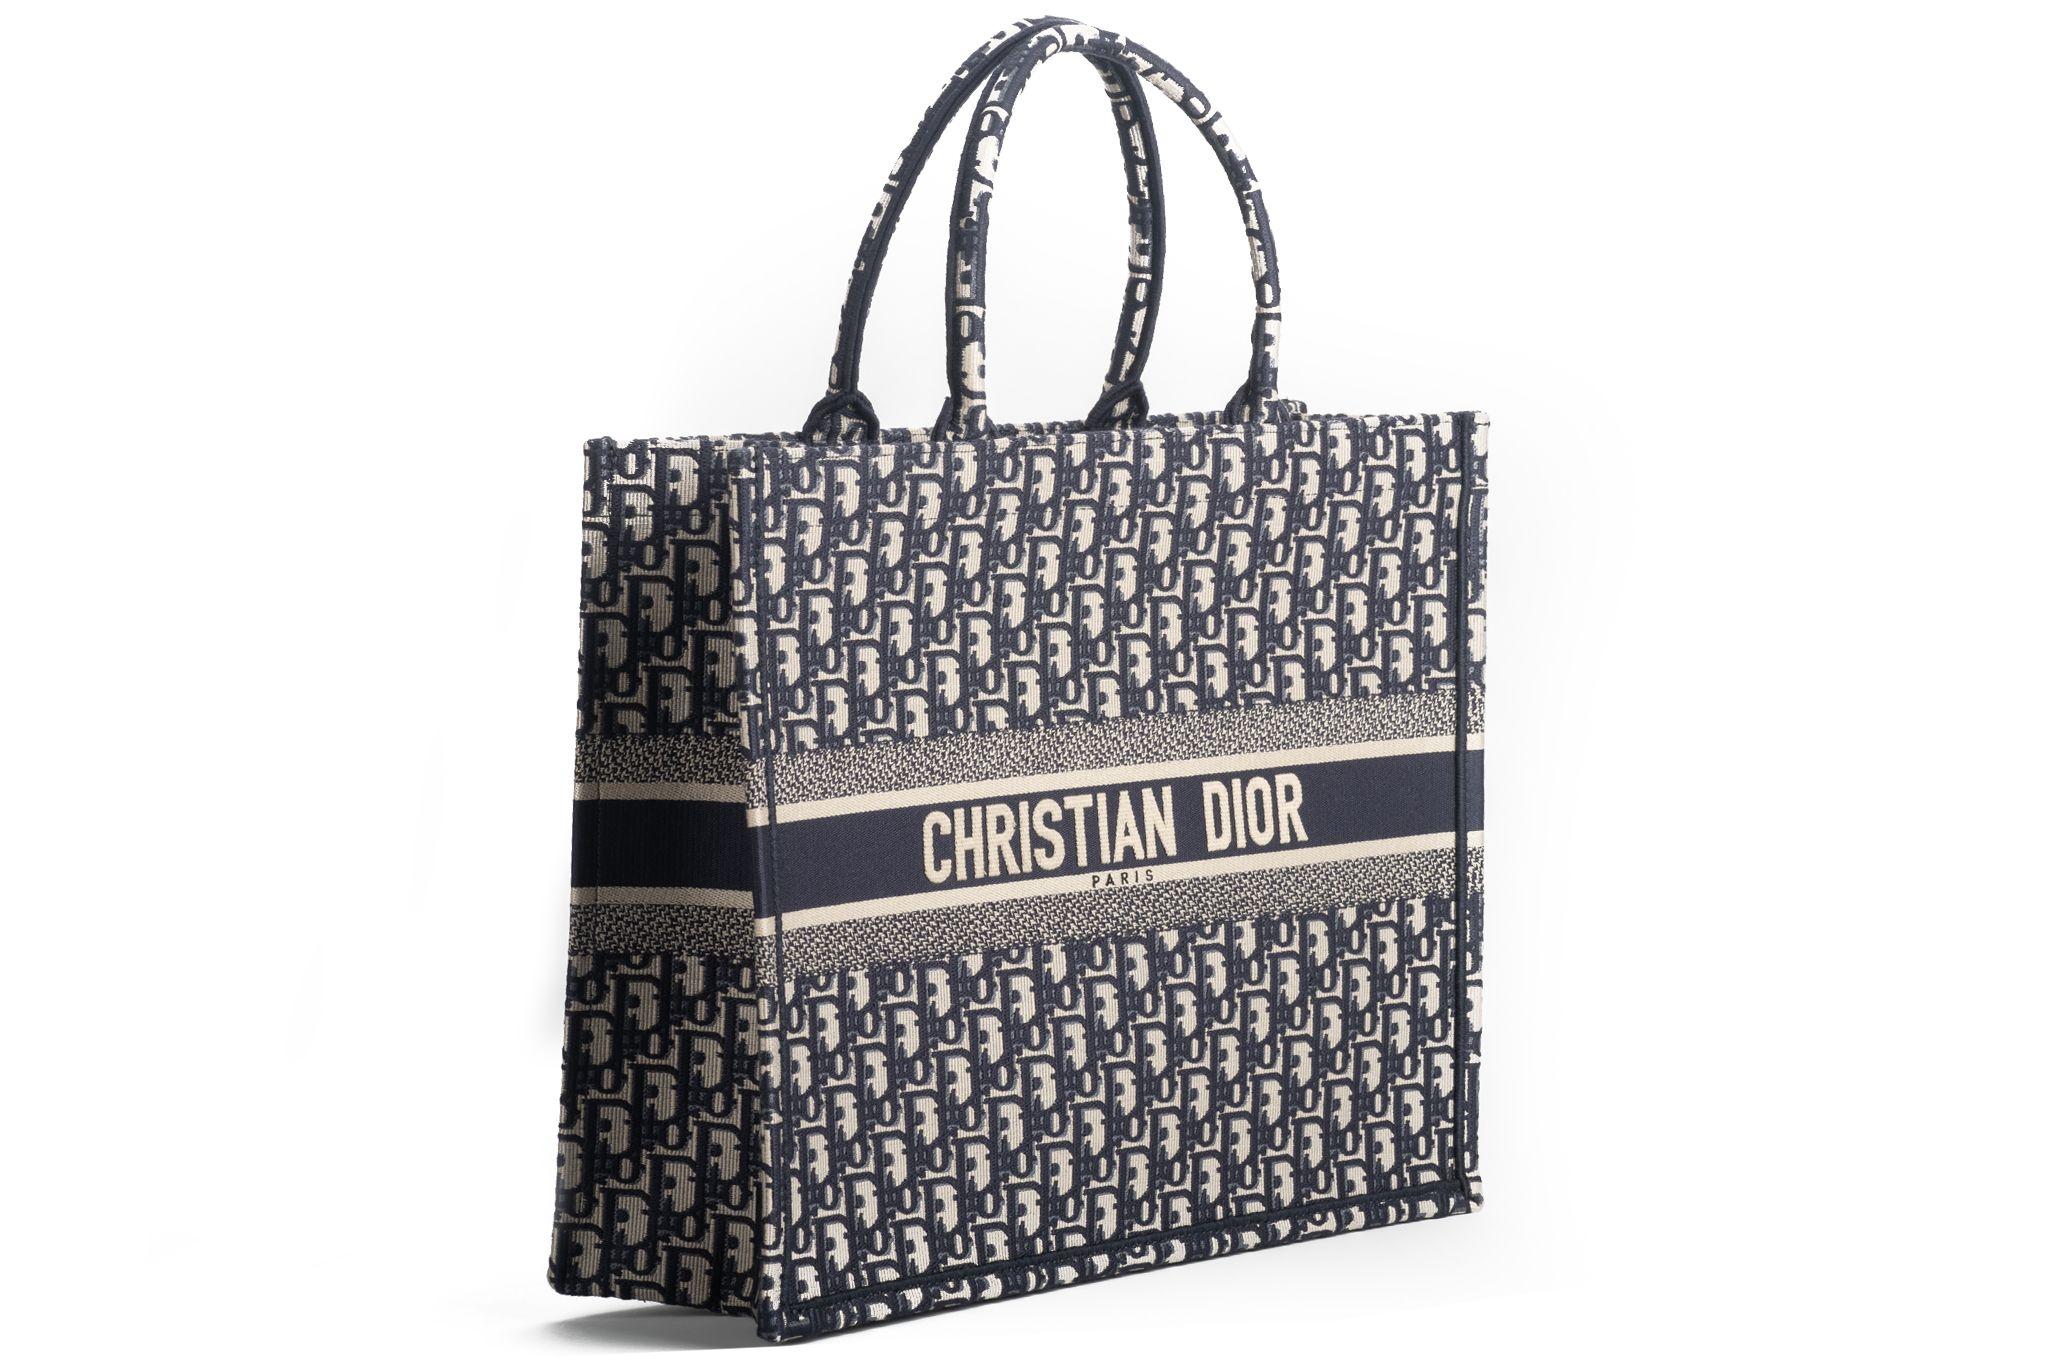 Dior brand new large book tote in blue and white monogram canvas. Comes with original dust cover.